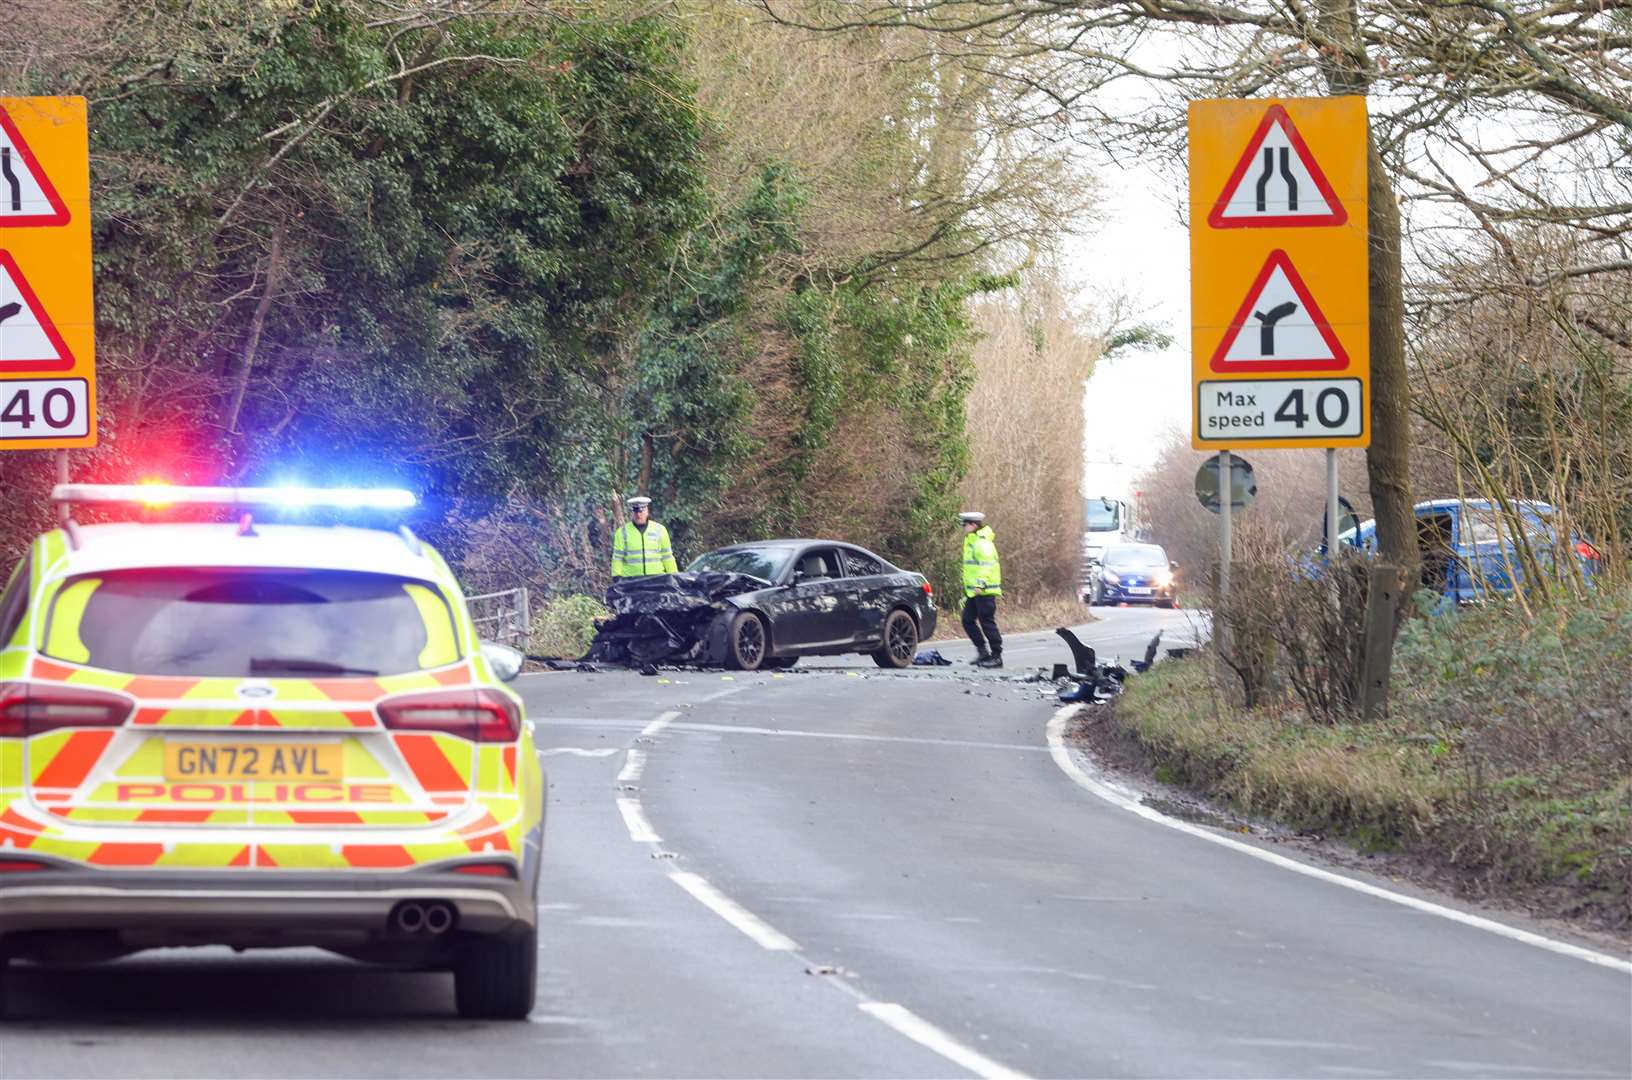 The A228 was closed in both directions./ppPicture: UKNIP